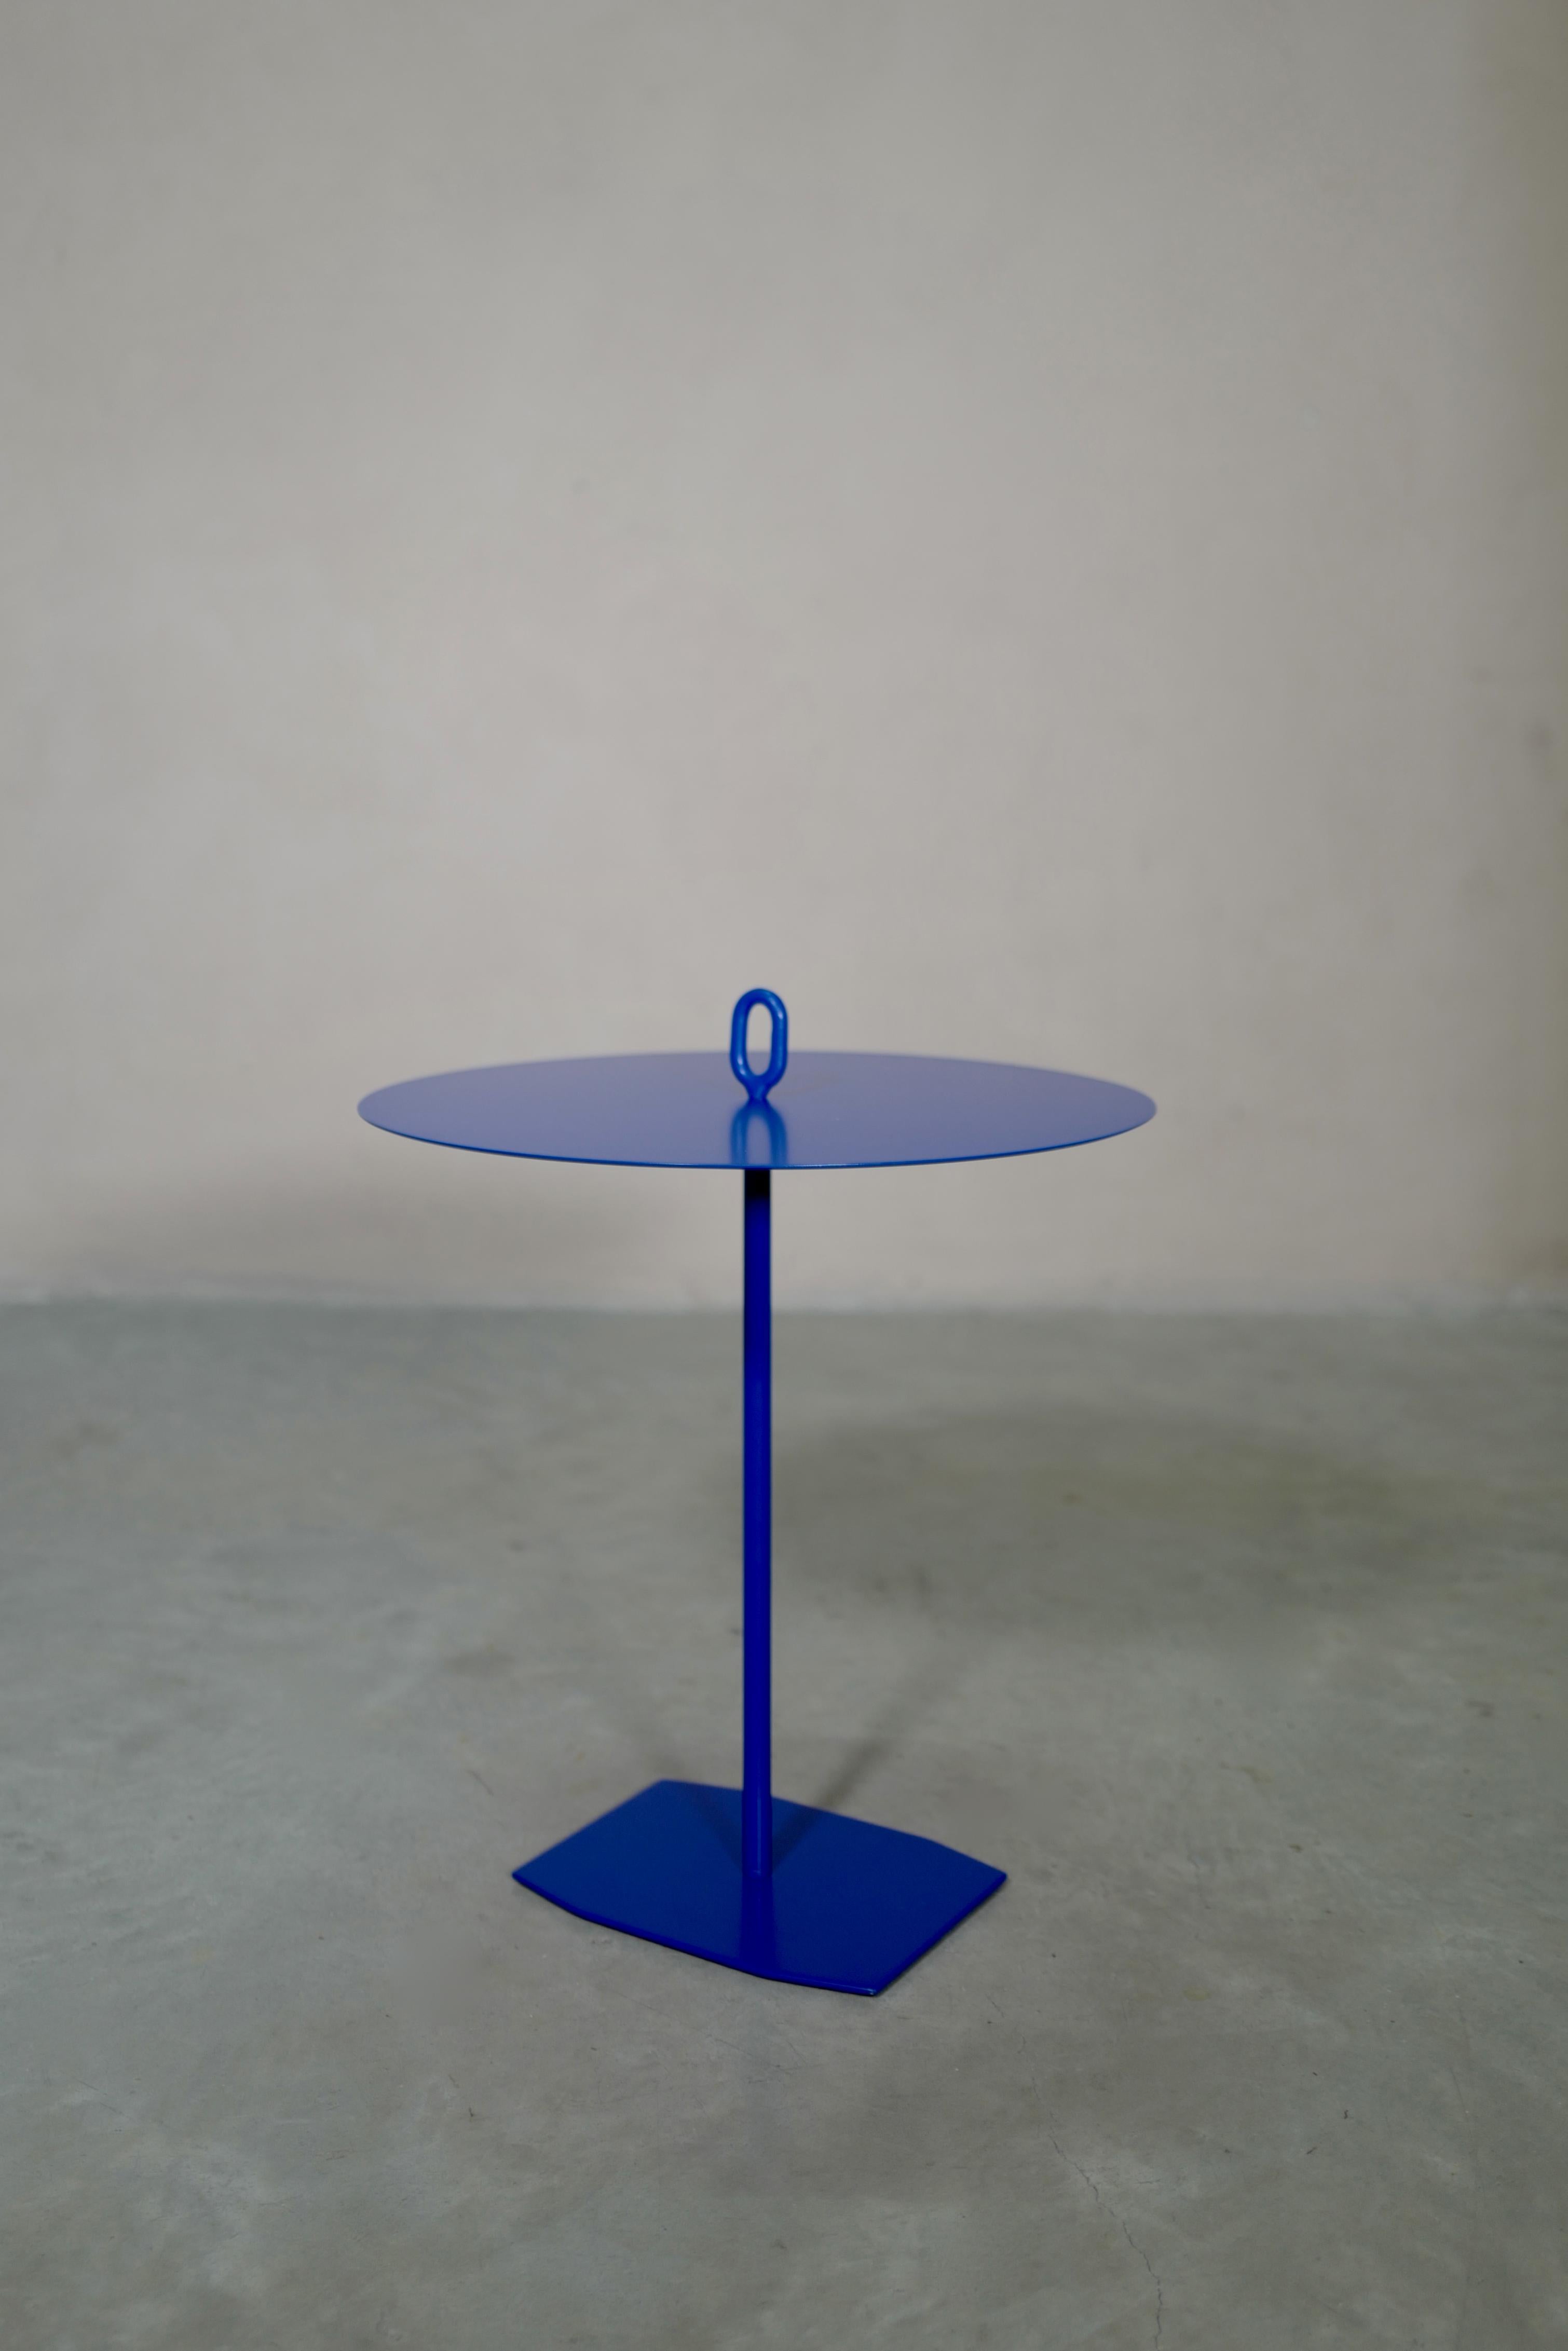 Small contemporary italian coffee table with eyelet. Steel pedestal rod and eyelet, aluminum top. “Signal blue” powder coated. The eyelet on the top allows the table to be moved easily even with objects on it. Other sample colors available on